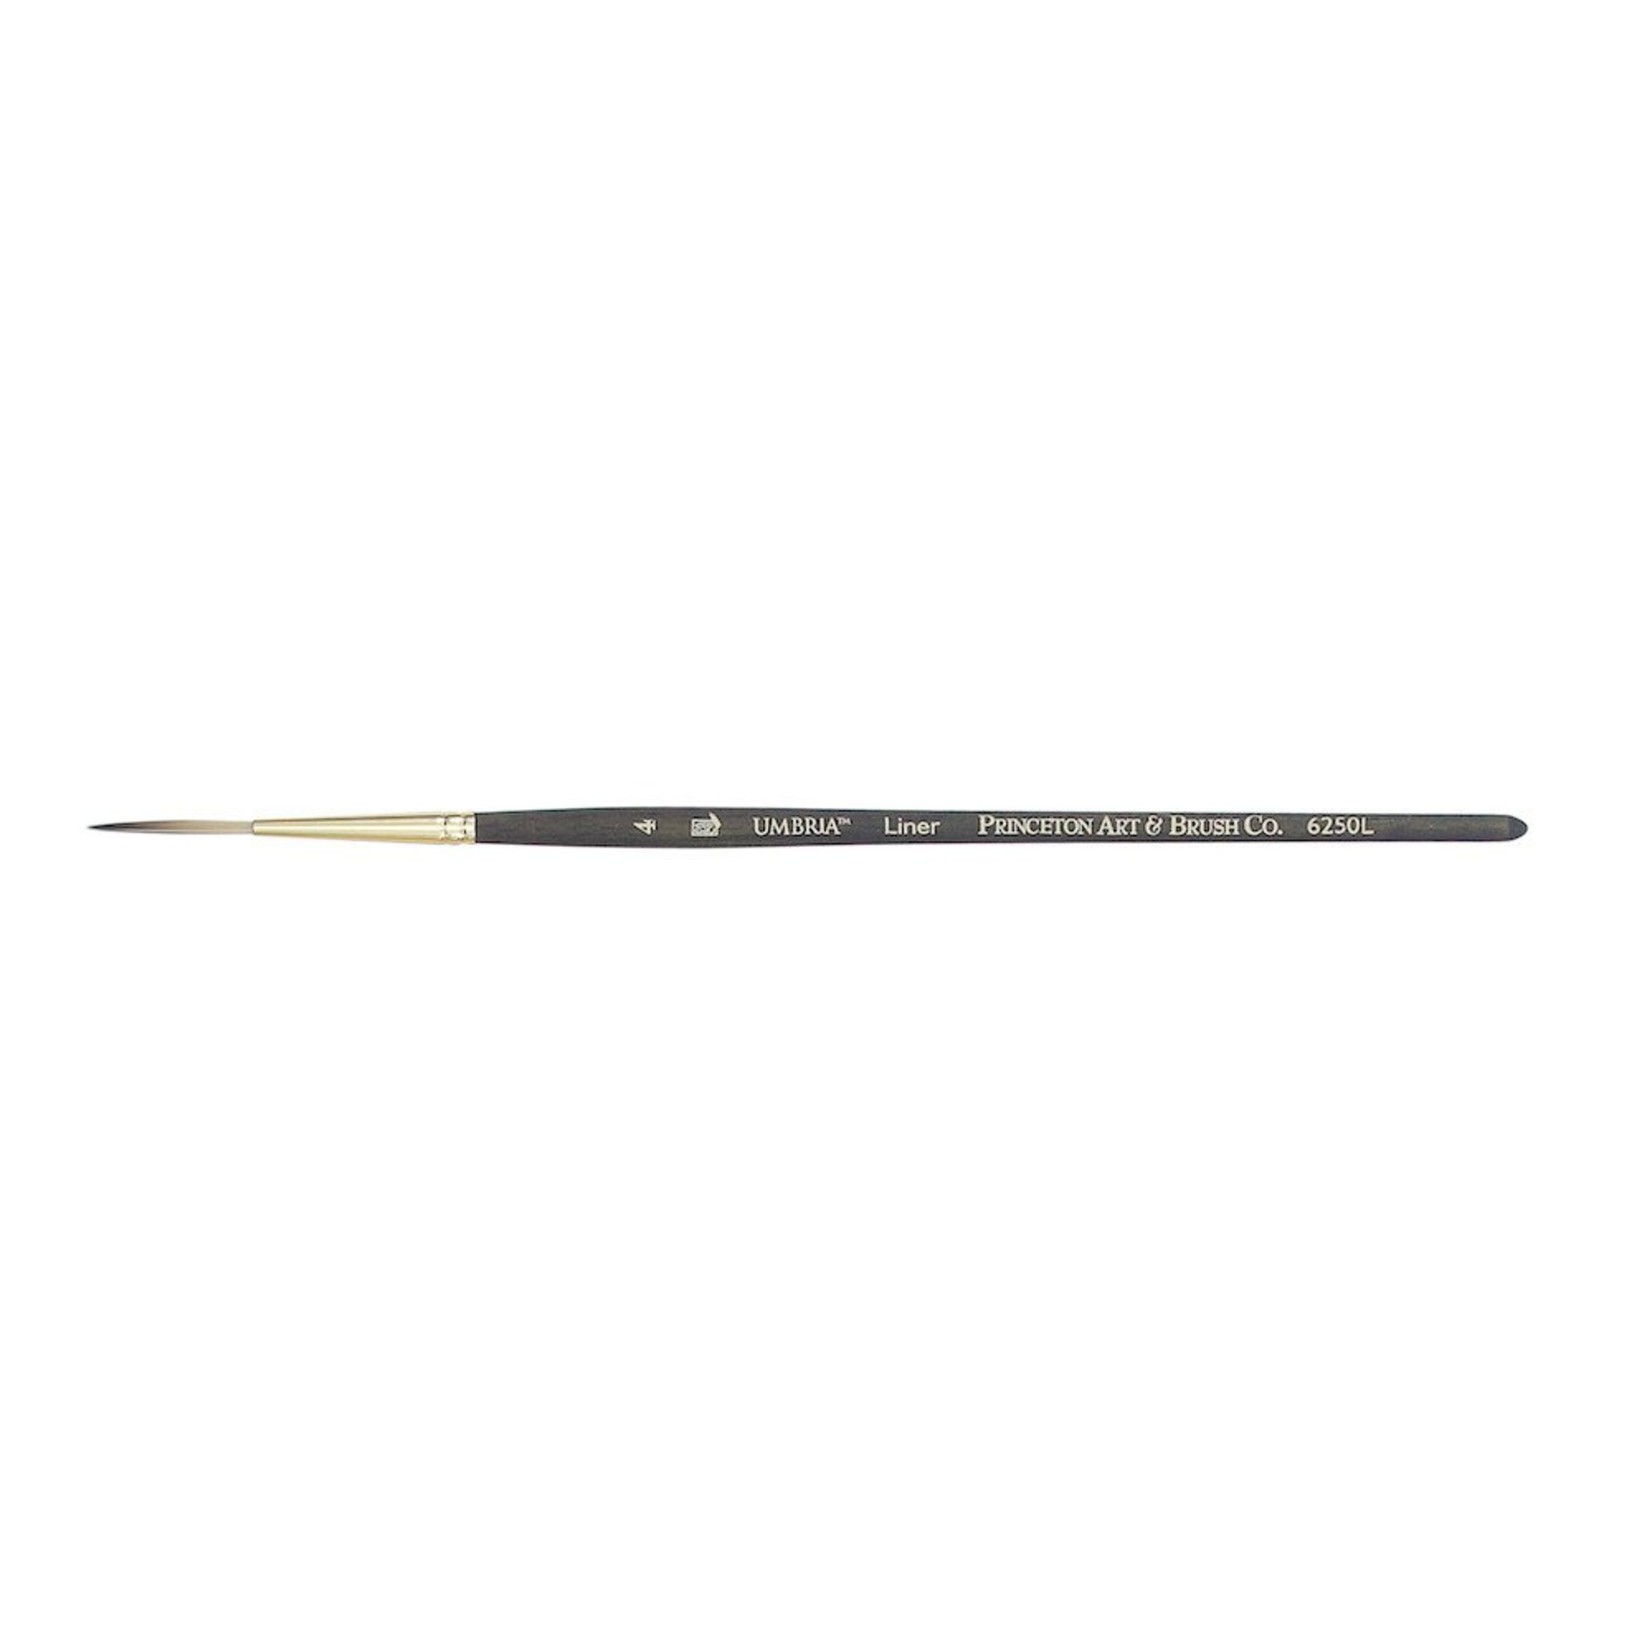 PRINCETON PRINCETON UMBRIA BRUSH SERIES 6250 SPECIAL SYNTHETIC SH LINER 2